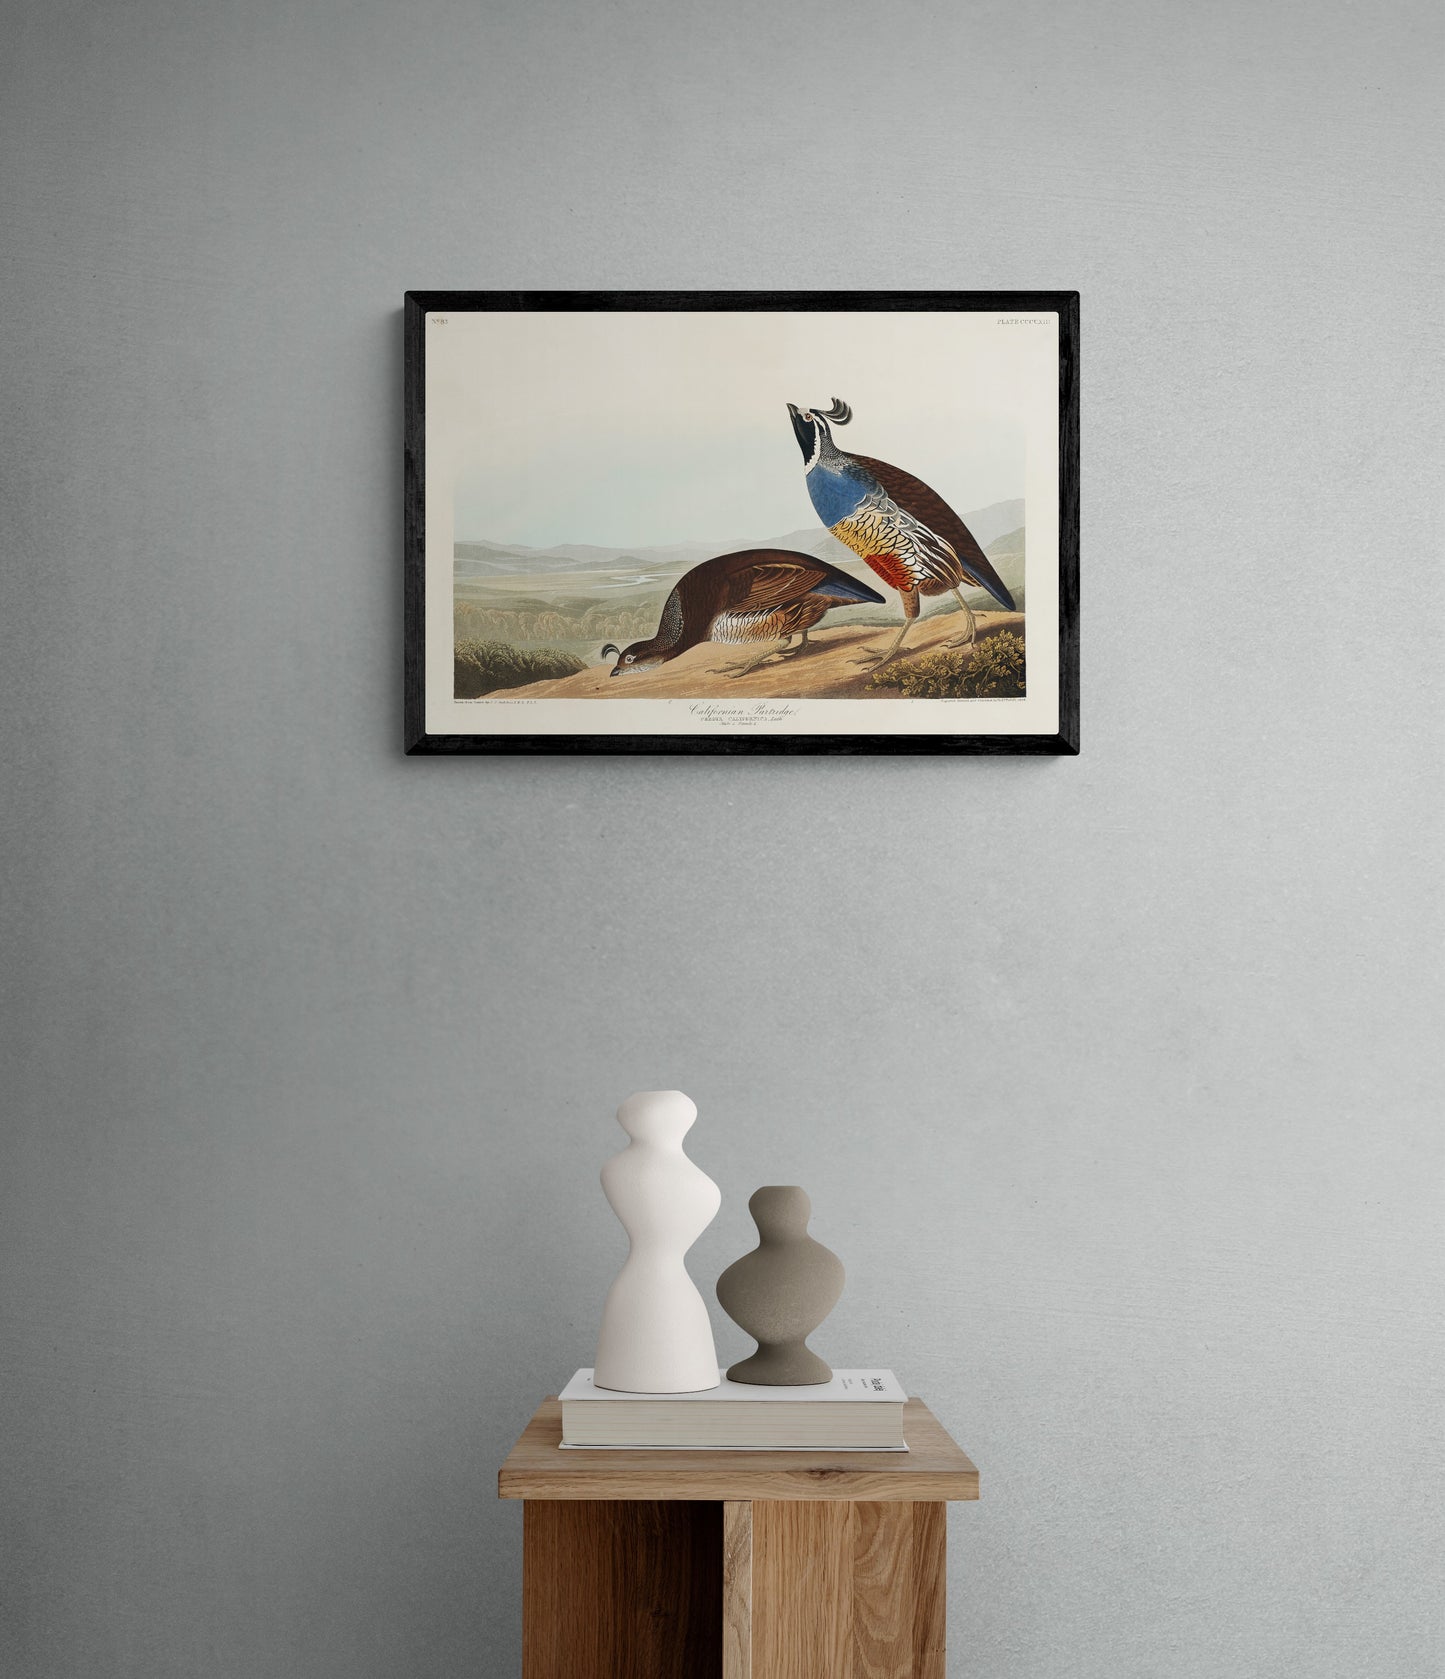 Vintage naturalistic bird illustrations: California Partridge. Prints on art paper, canvas, and framed canvas. Free shipping in the USA. SKUJJA032